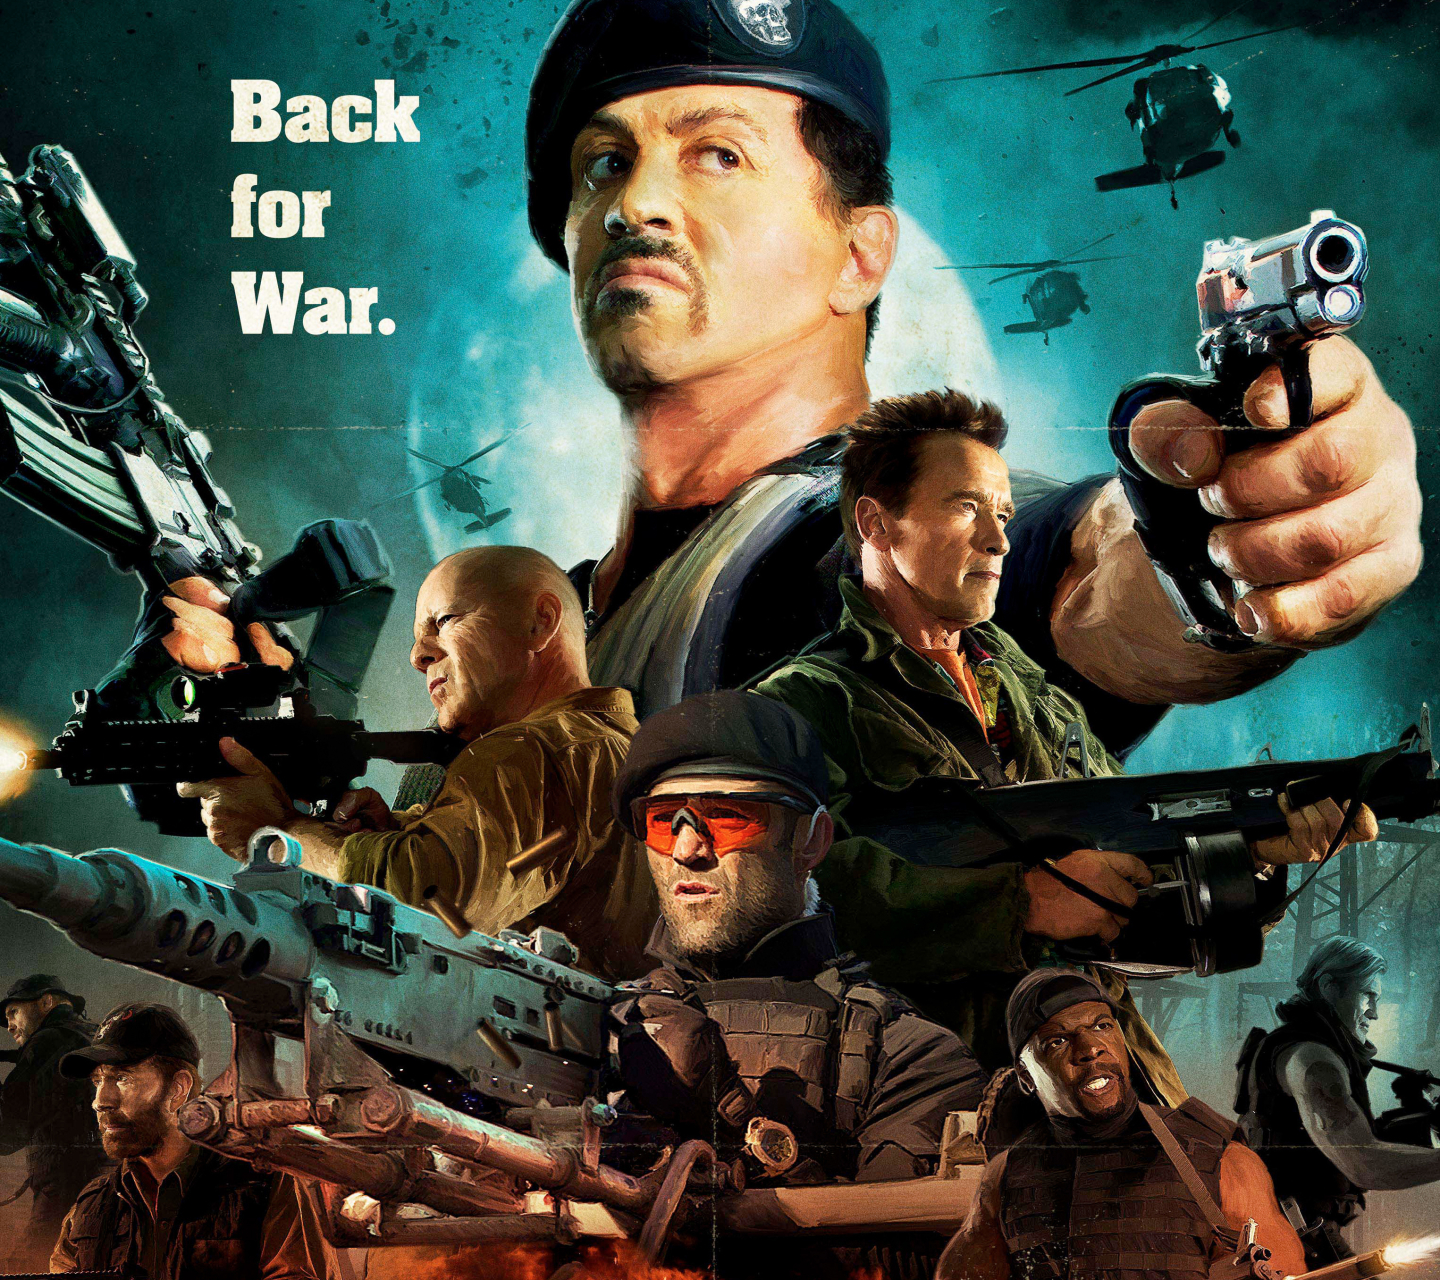 movie, the expendables 2, chuck norris, randy couture, bruce willis, sylvester stallone, arnold schwarzenegger, dolph lundgren, jason statham, terry crews, hale caesar, barney ross, trench (the expendables), lee christmas, gunnar jensen, toll road, booker (the expendables), church (the expendables), the expendables 8K